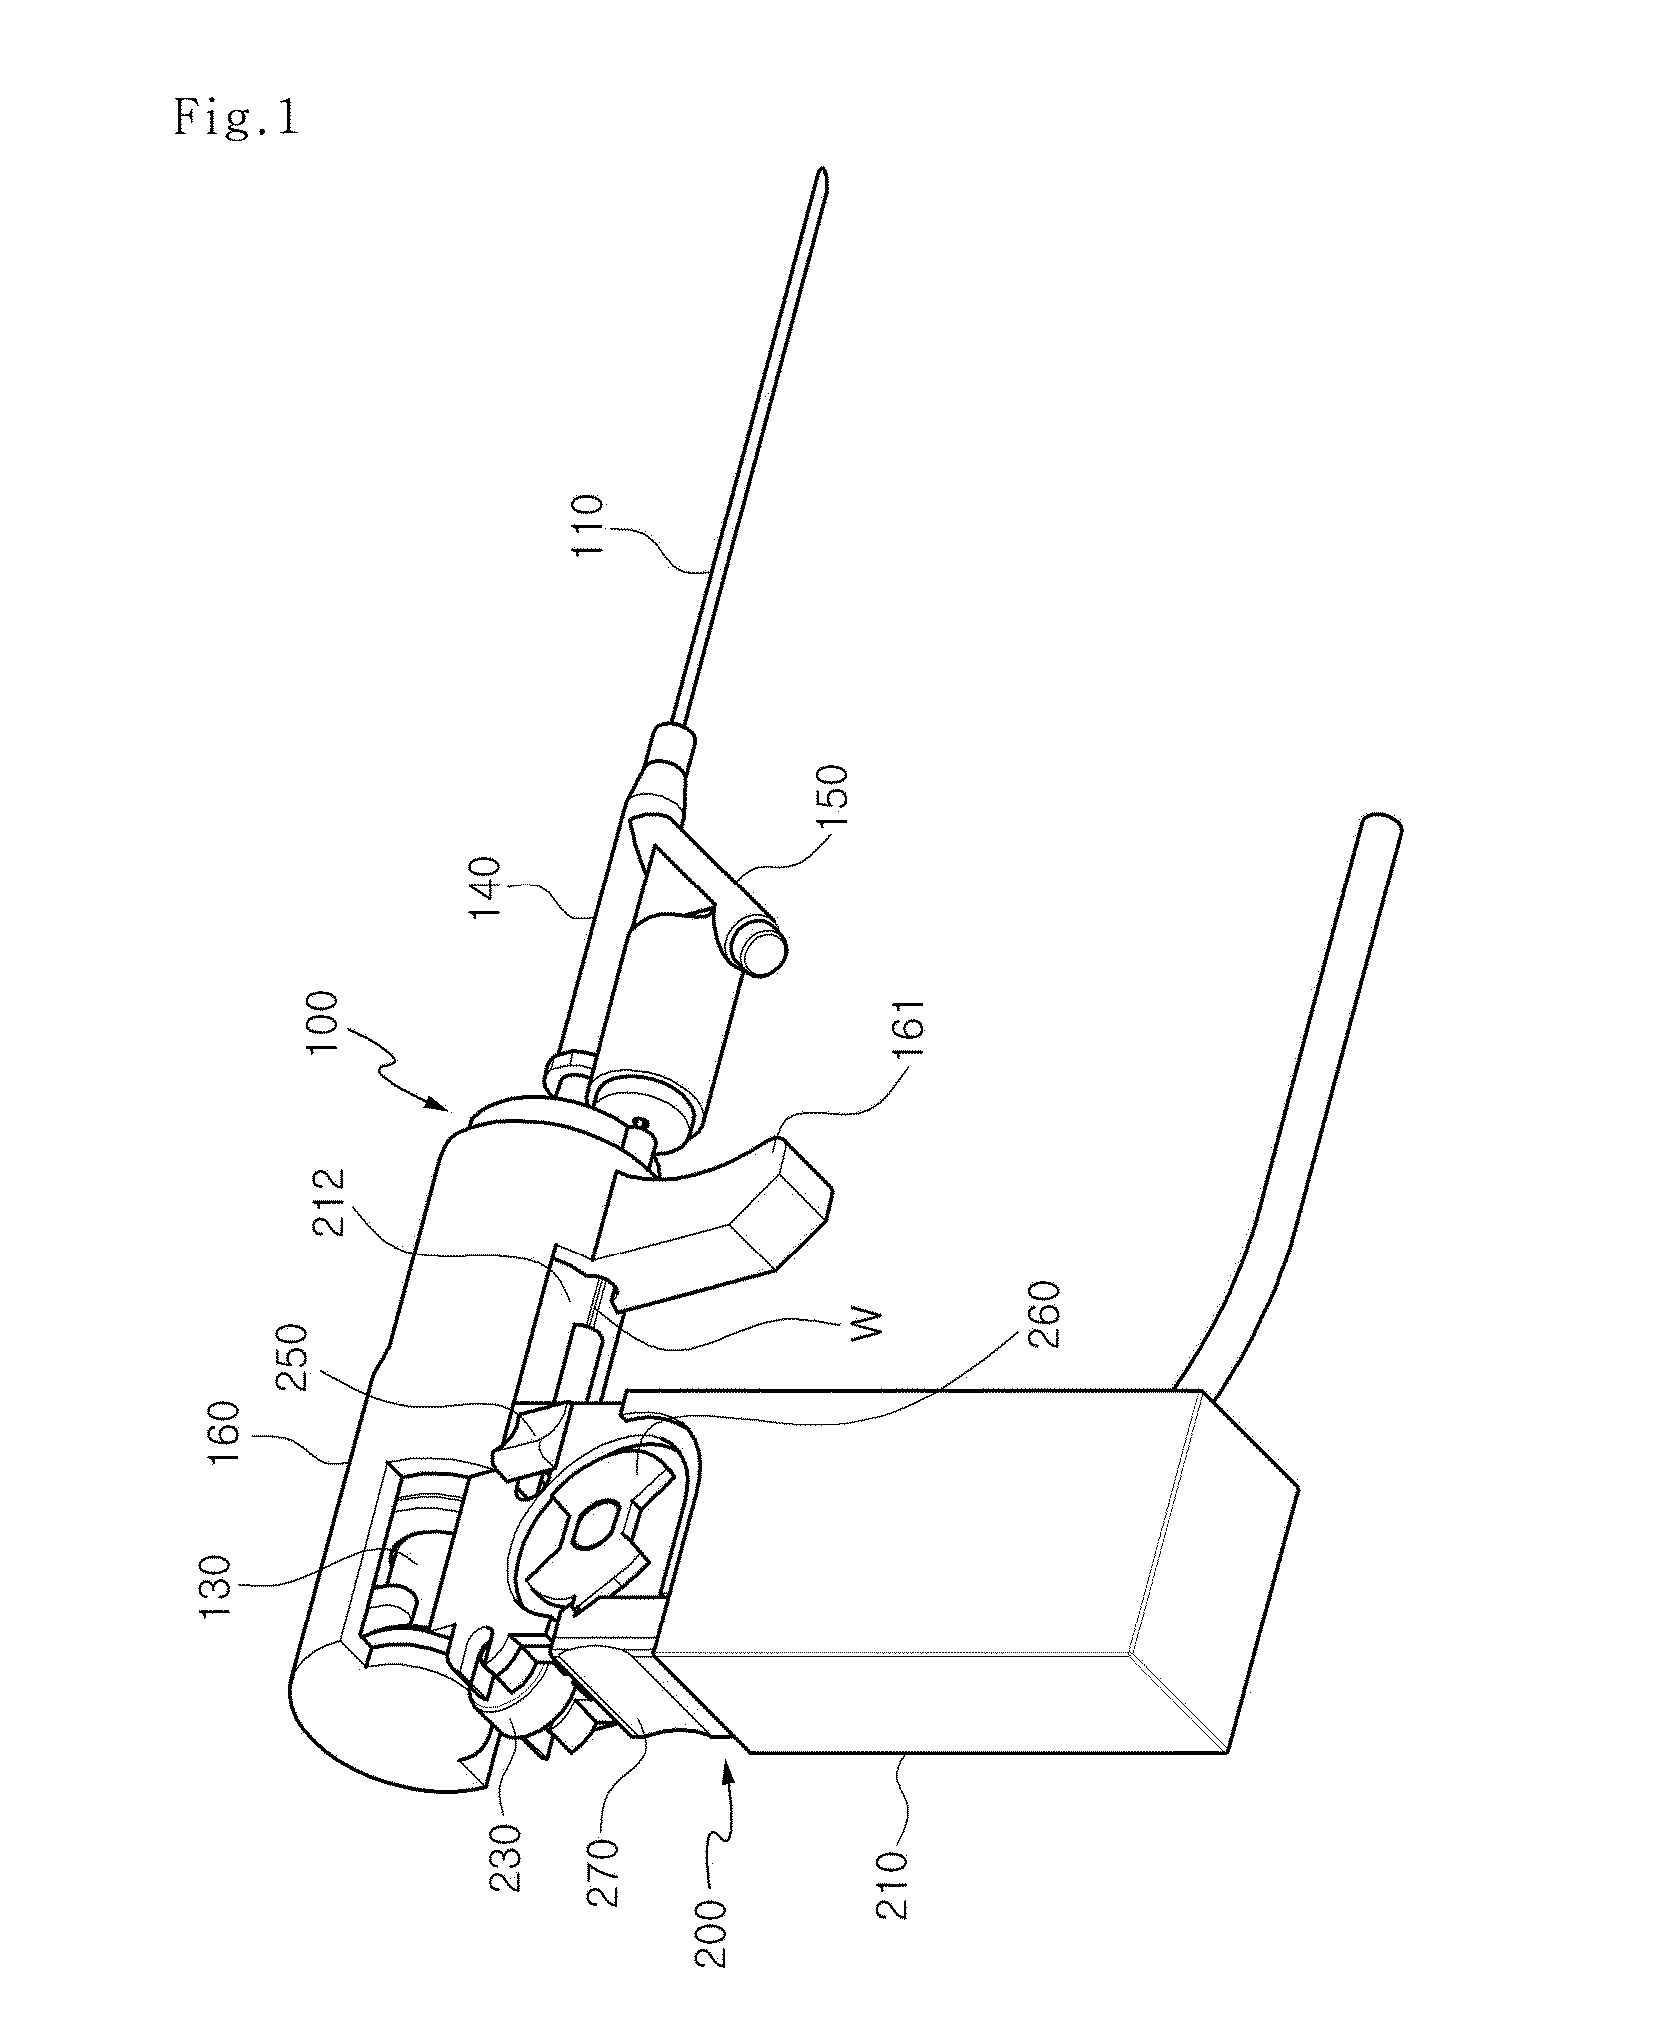 Guide wire insertion apparatus used in catheterization